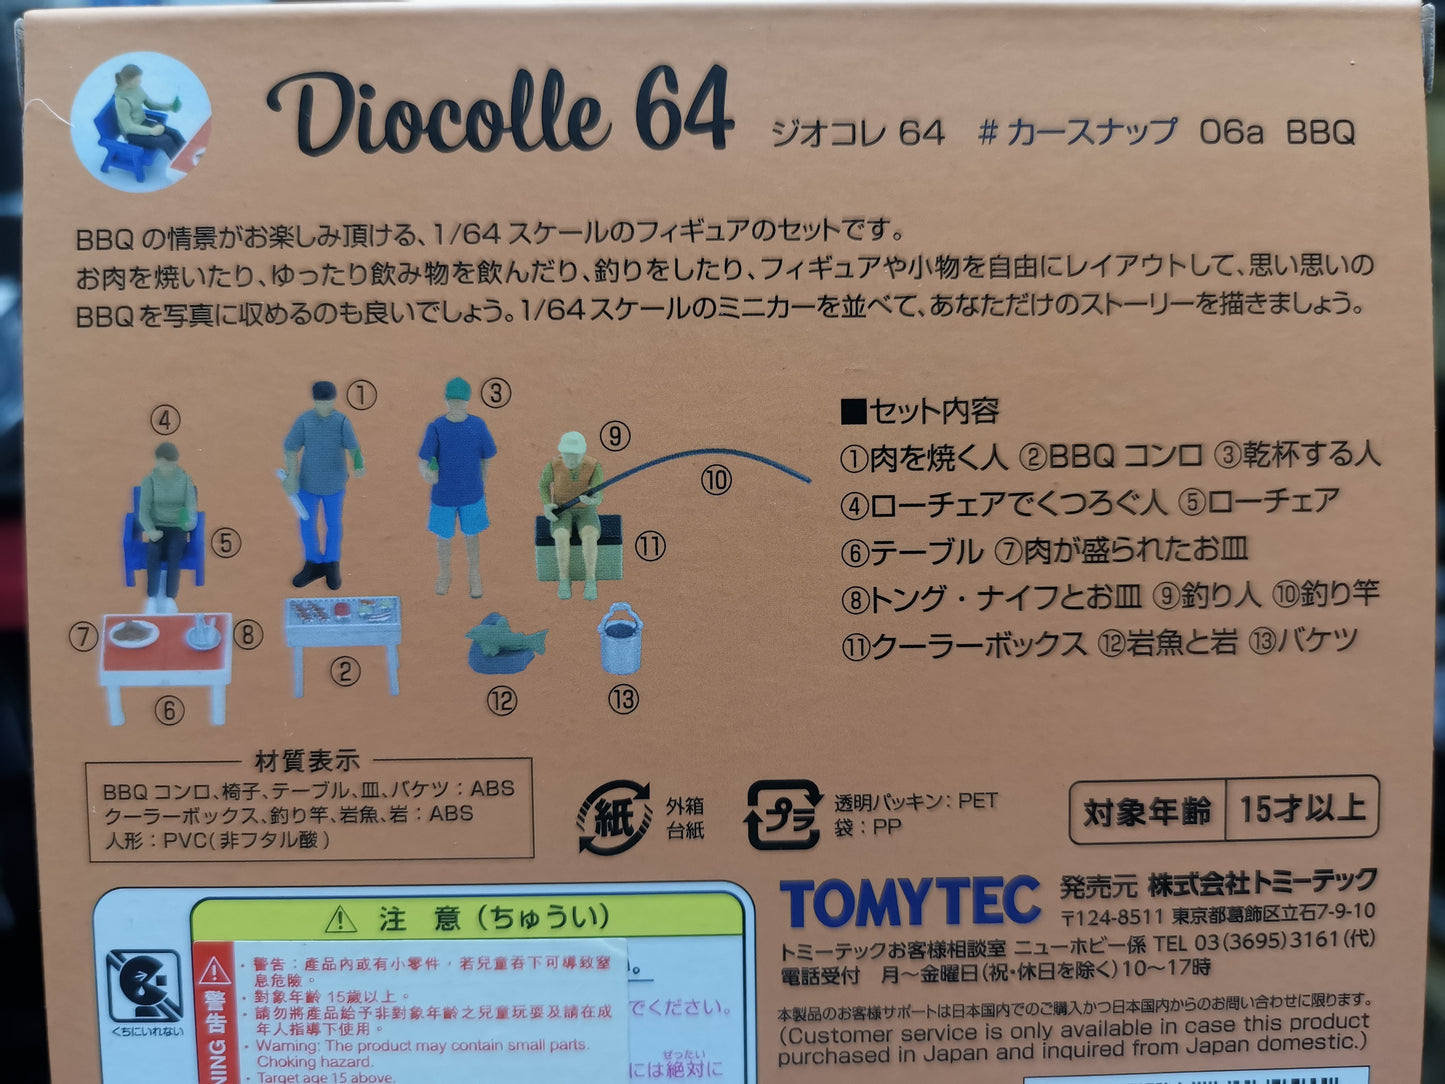 Tomica Limited Vintage Neo Diocolle 64 #Car Snap 06a BBQ Takara Tomy